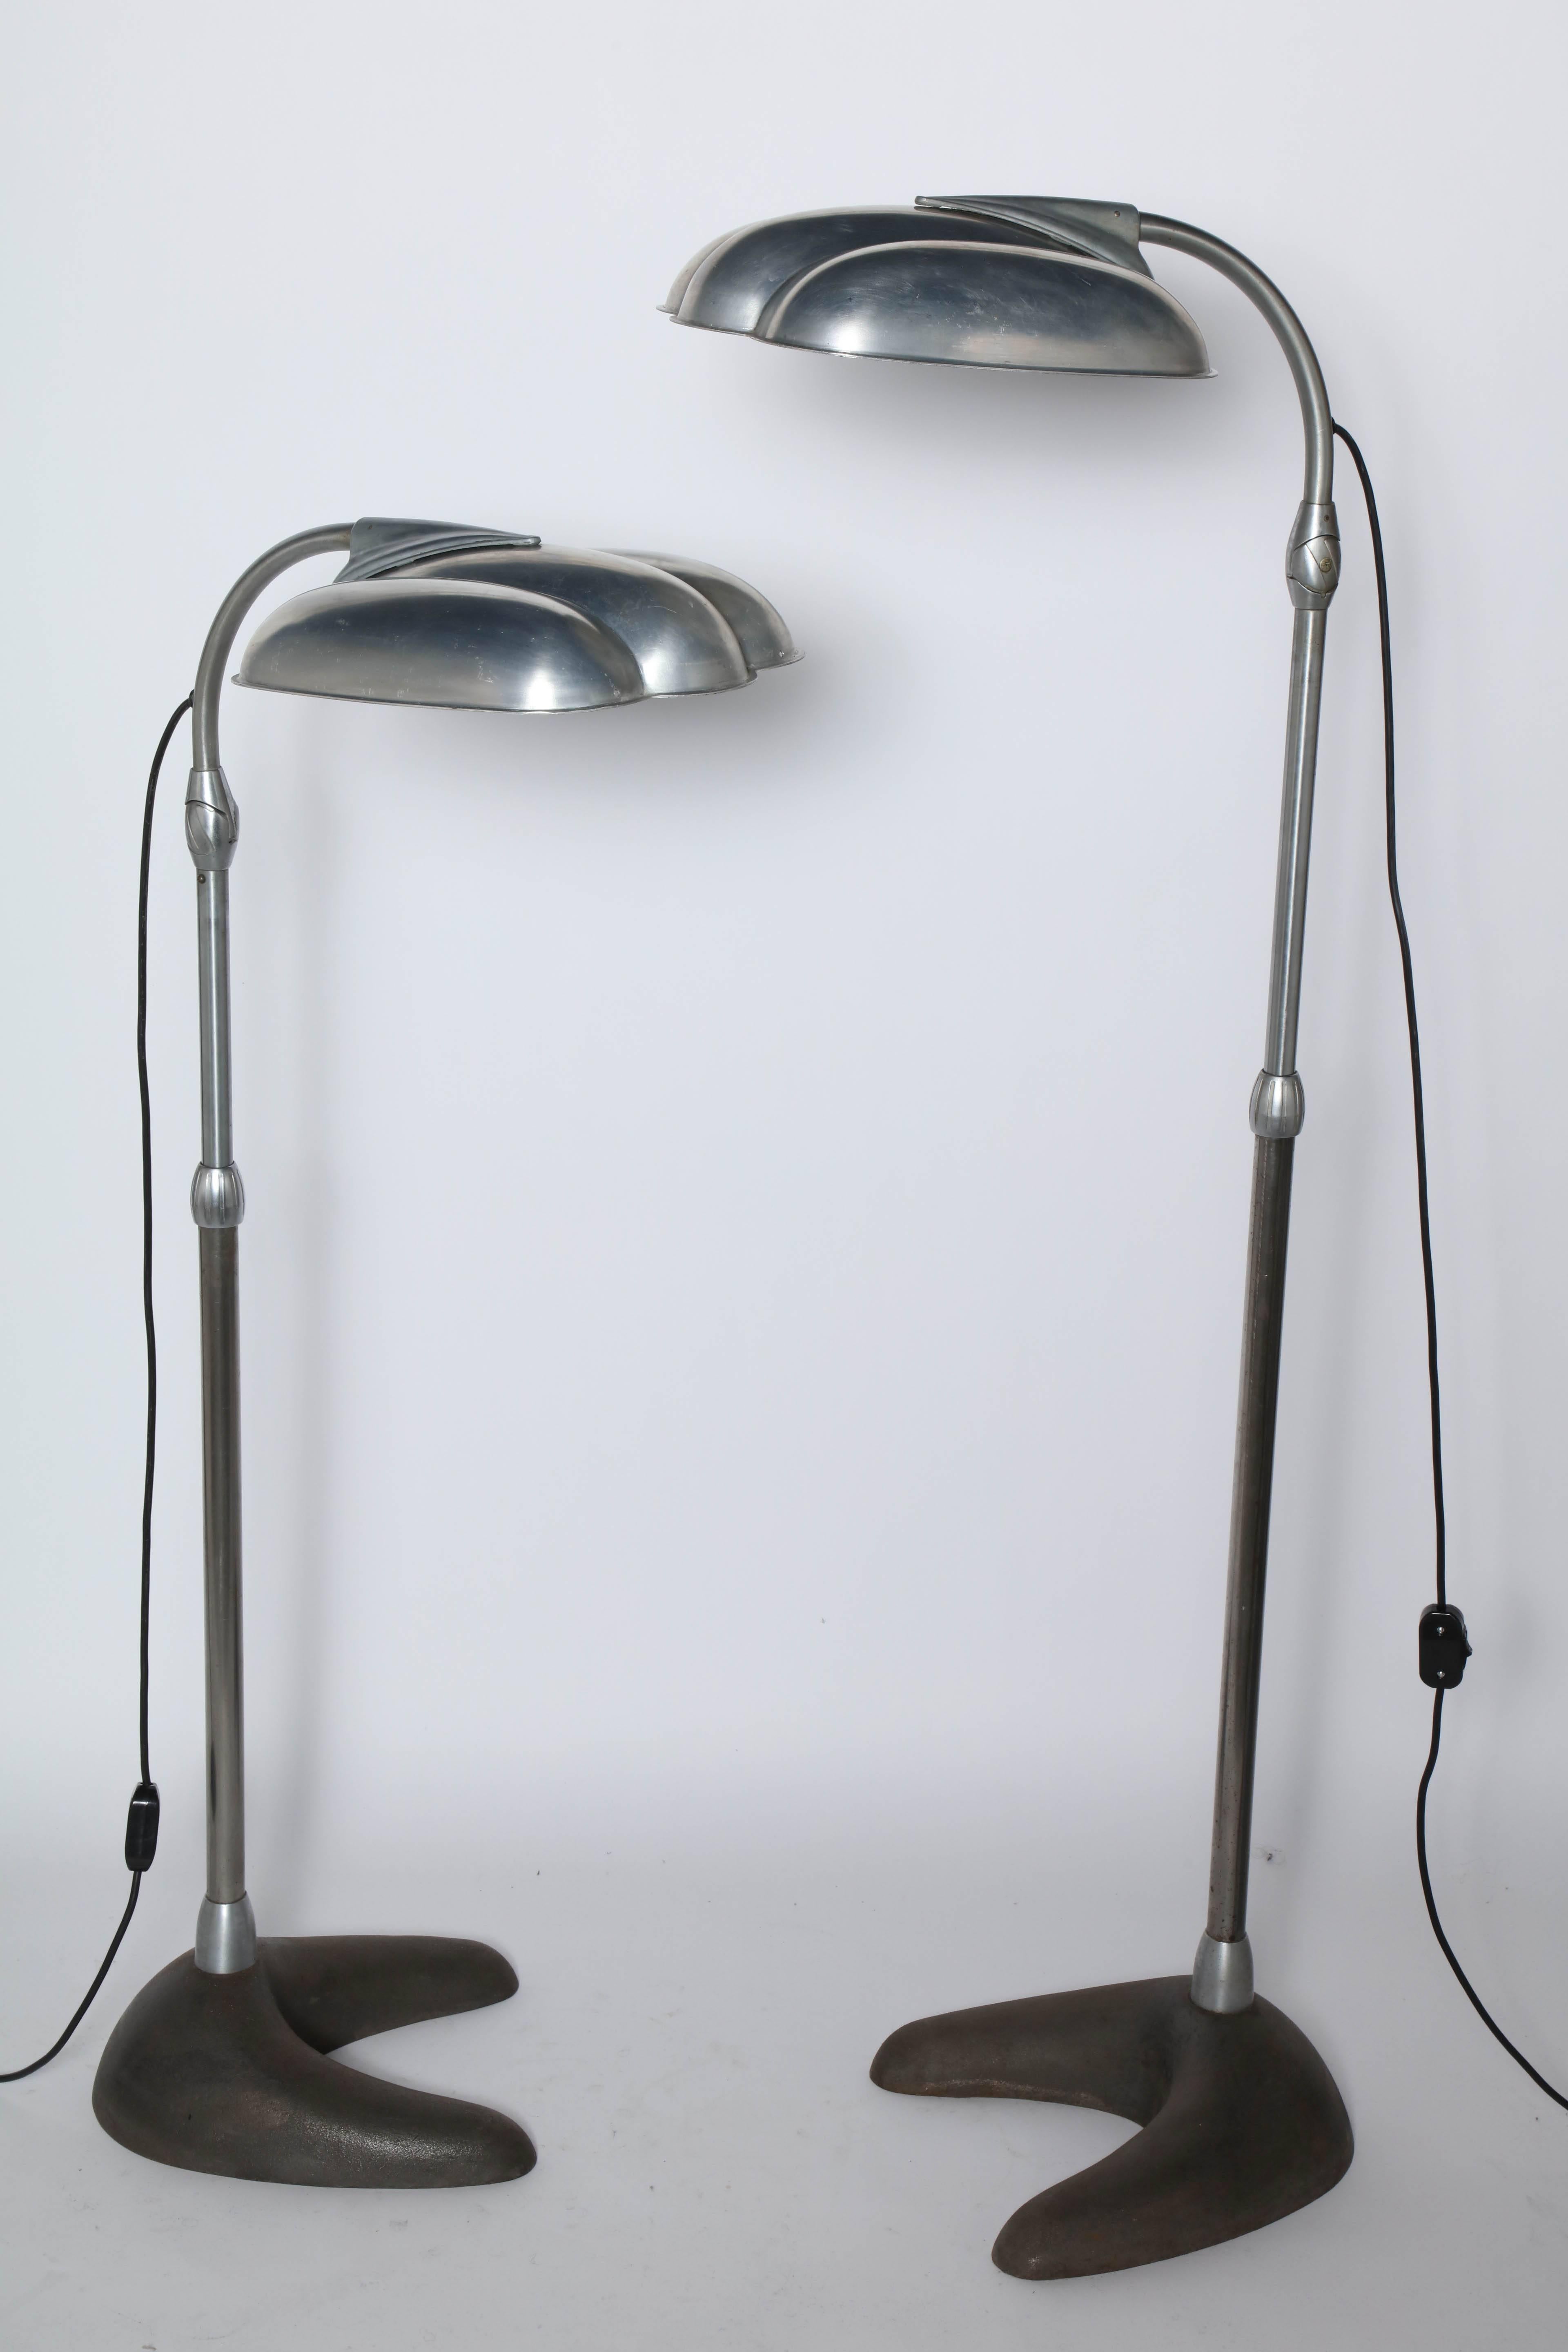 Pair of Sperti Sunlamp Inc. adjustable, repurposed light therapy Floor Lamps in the style of Raymond Loewy. Featuring articulating machined grooved Clam Shell Aluminum Reflector Shades, tilting lamp head, extension rod on heavy Dark Cast Iron